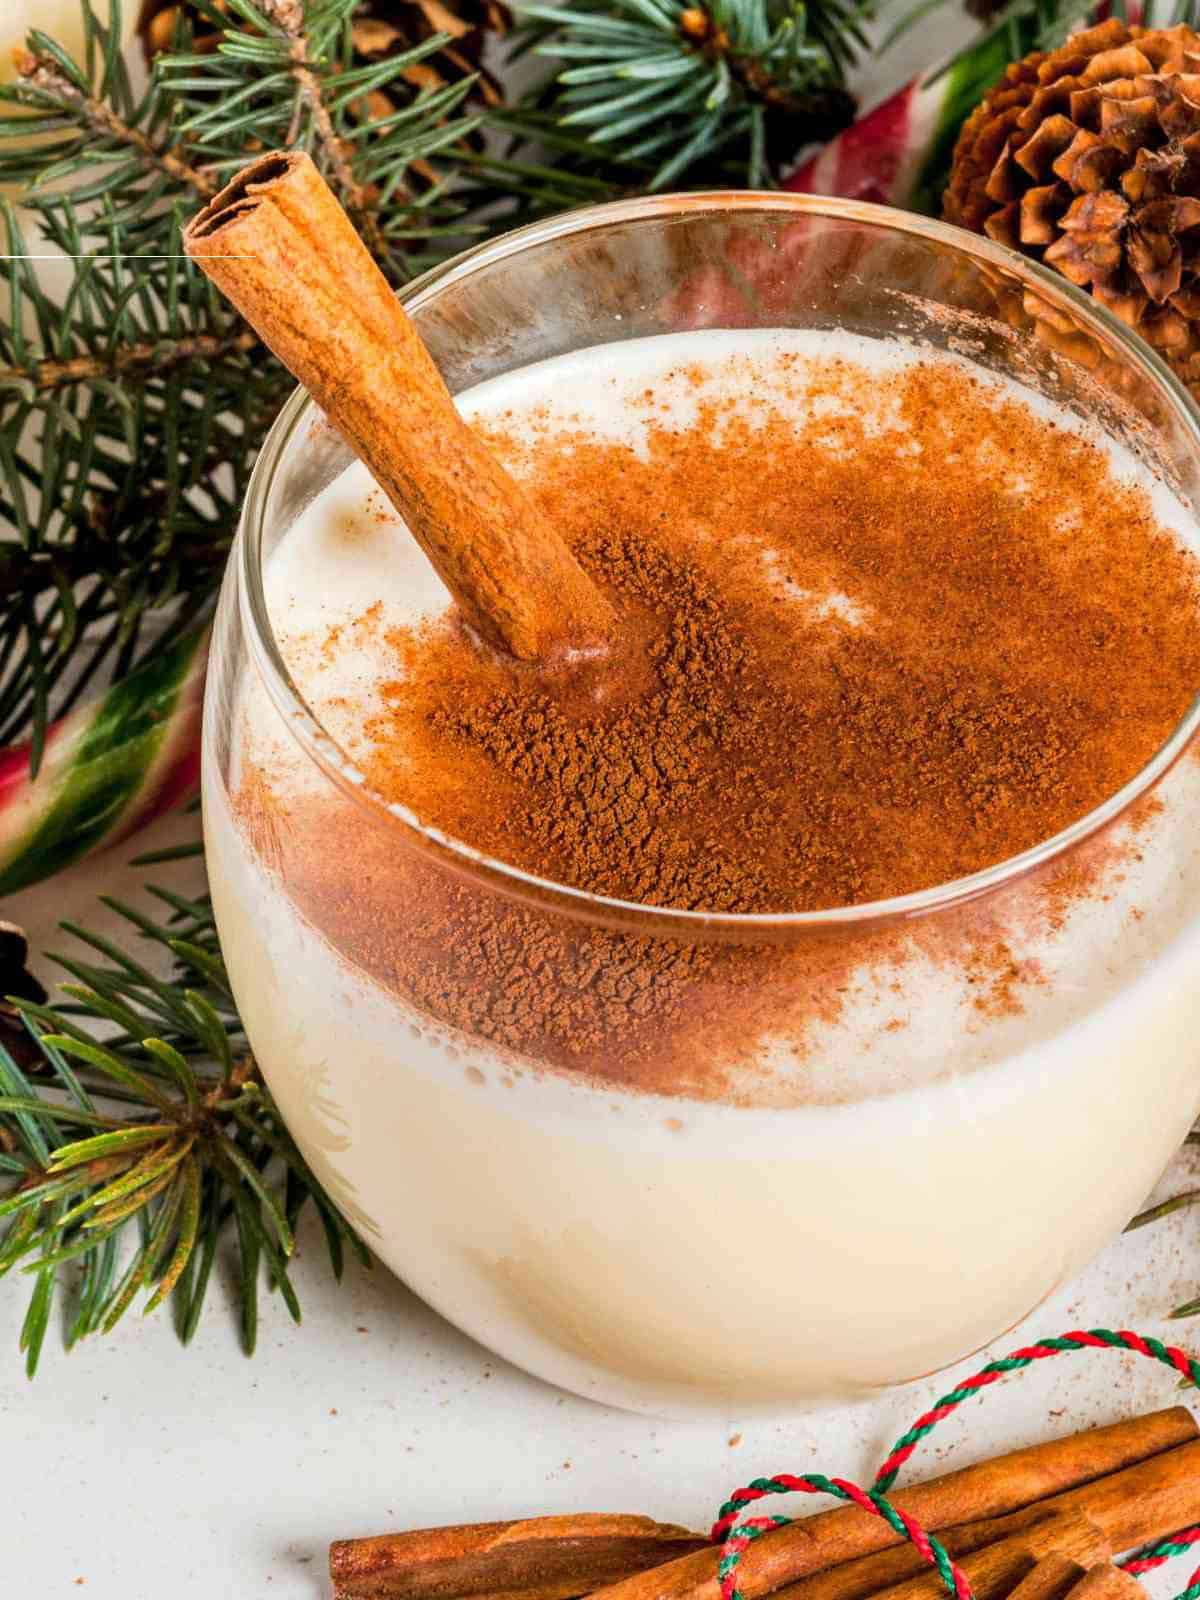 cinnamon sprinkled on top of a glass of eggnog.